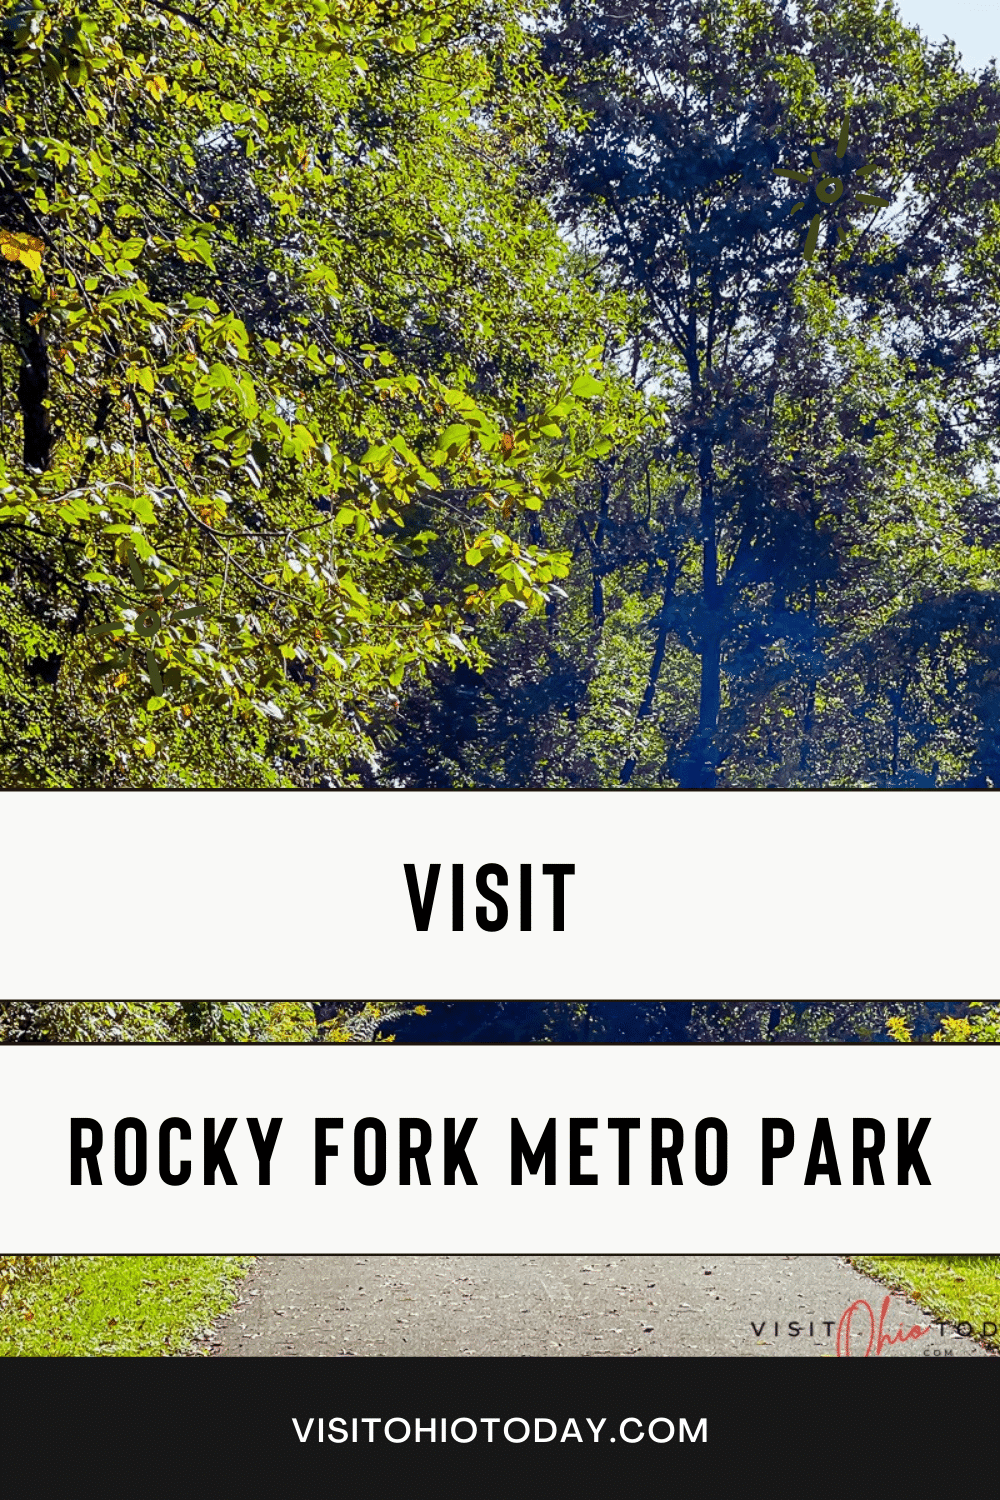 Rocky Fork Metro Park is located in Westerville, Ohio and is part of the Metro Parks of central Ohio. This metro park has paved paths, dog park, bridle trails, playground and more!